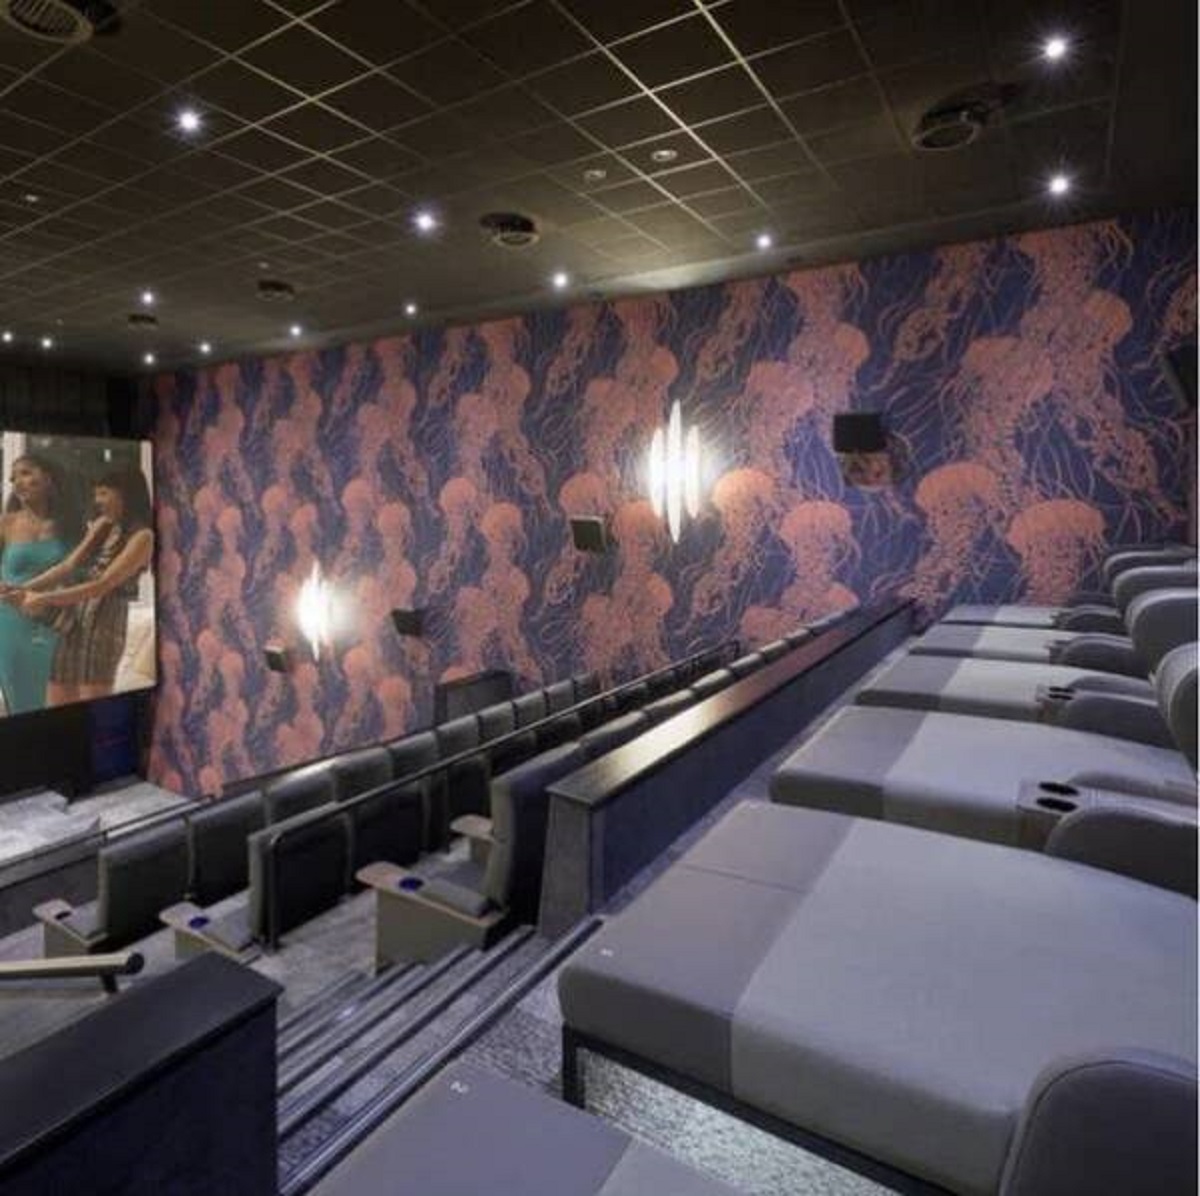 This movie theater in Croatia has literal beds in the last row. We all want to lie down when watching movies anyway!!! Gimme the bed seats!